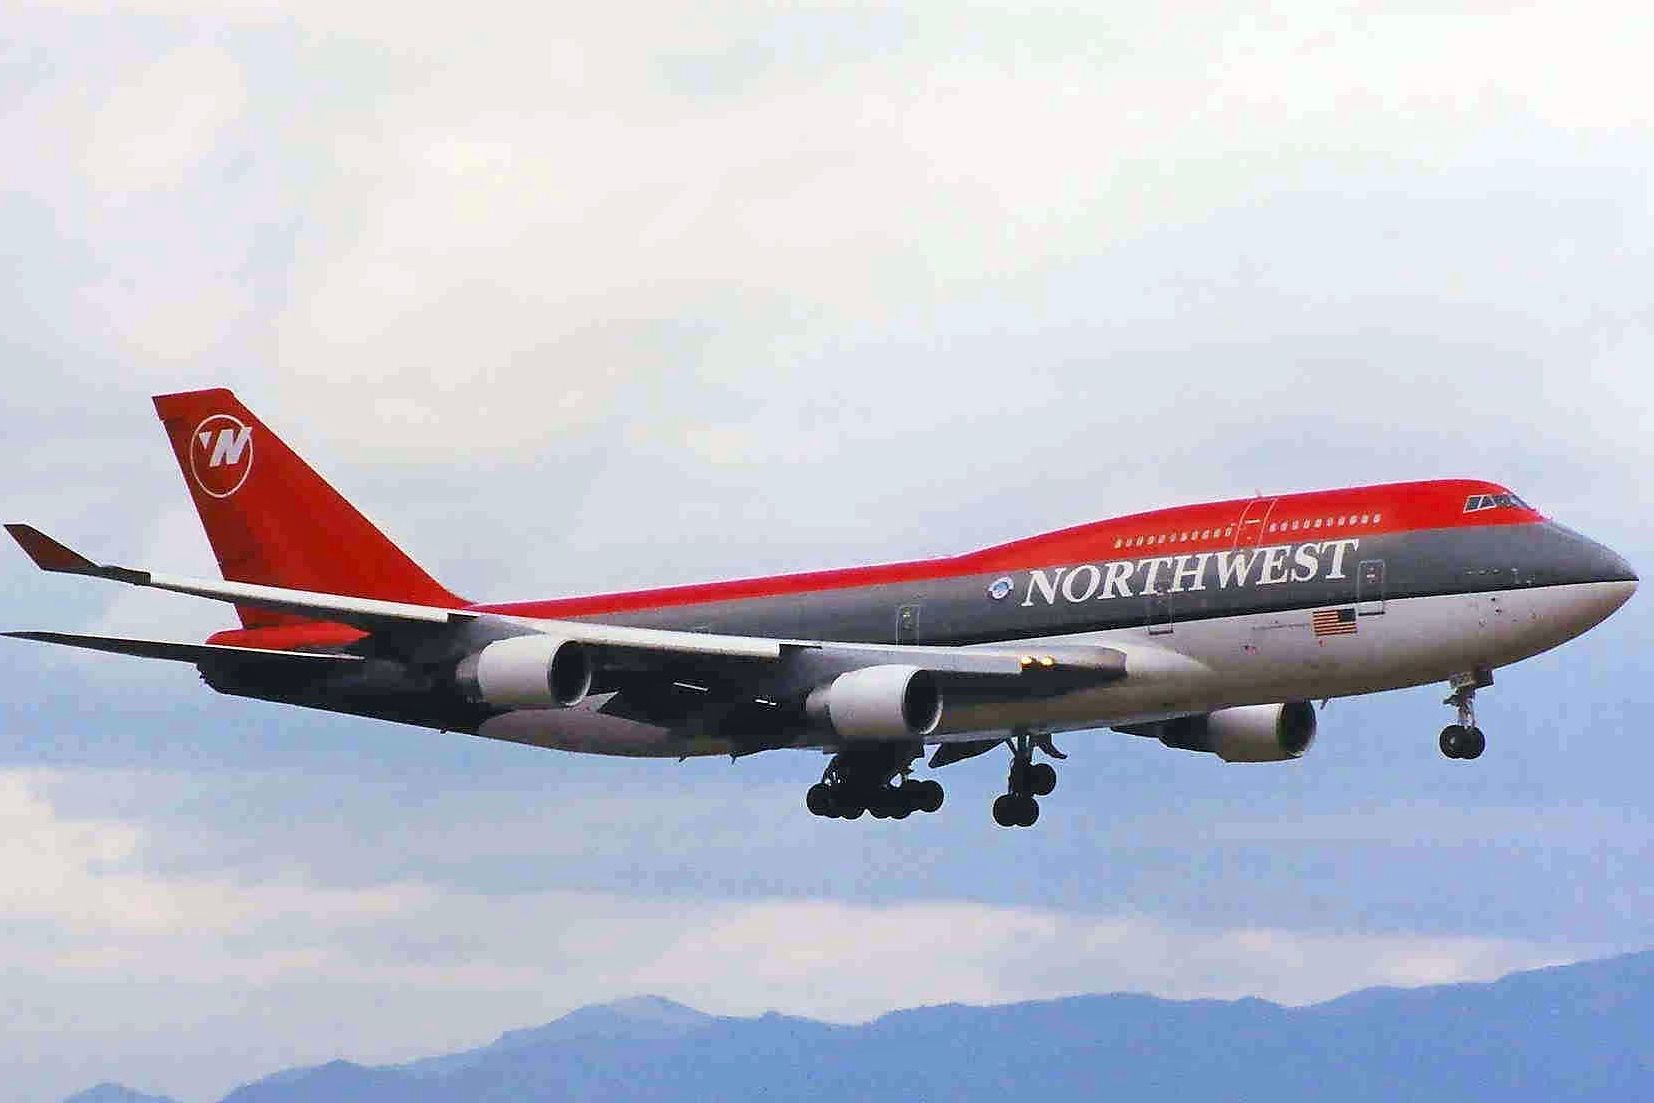 A Northwest Airlines Boeing 747 Flying in the sky.